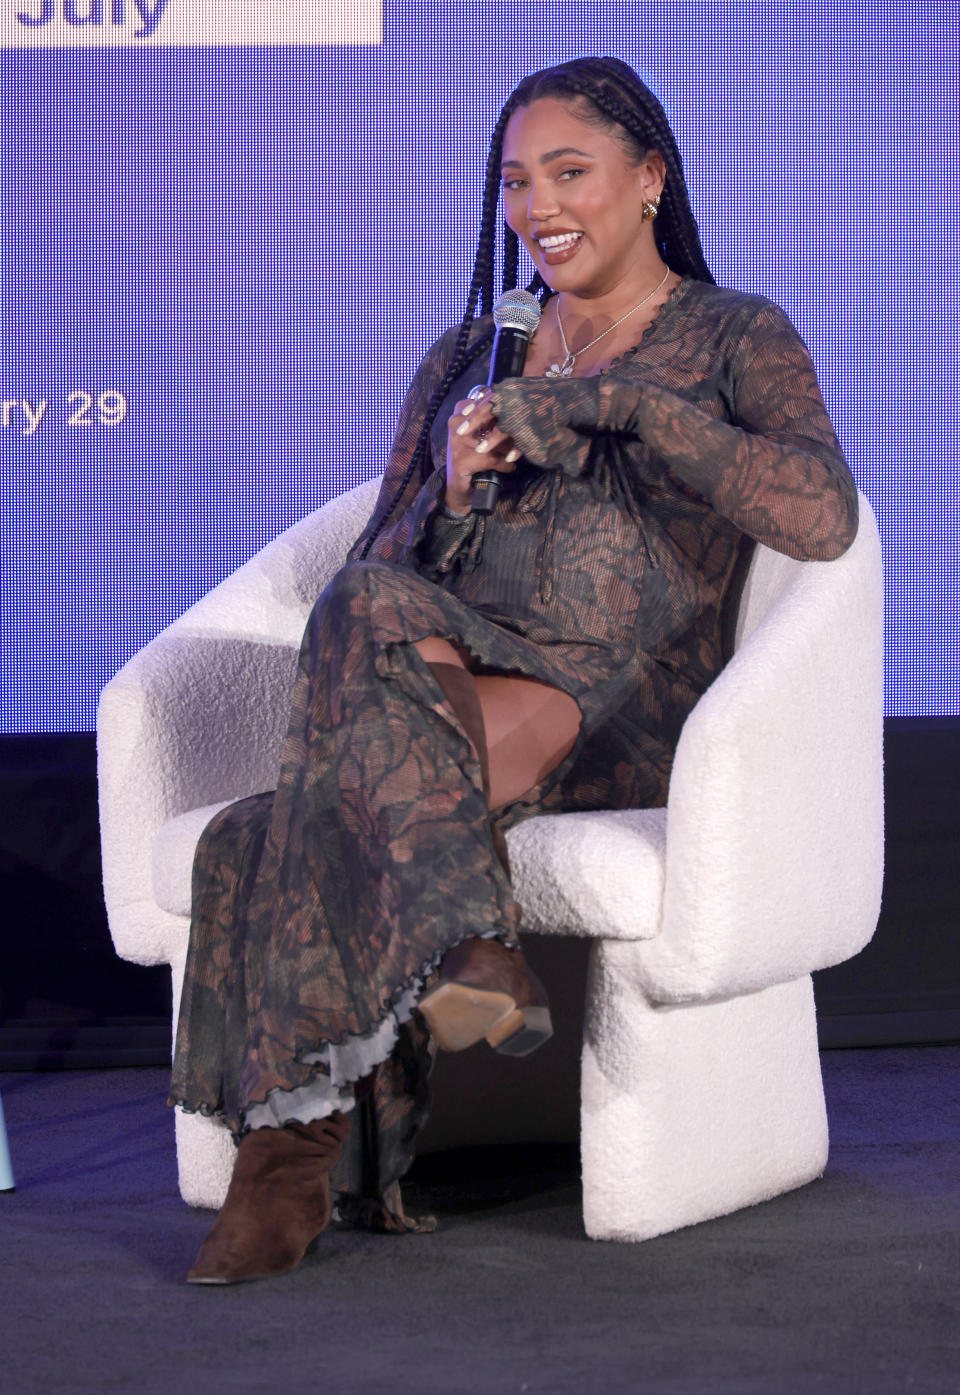 Ayesha Curry, speaks on stage during a Fireside chat in brown mid-calf boots